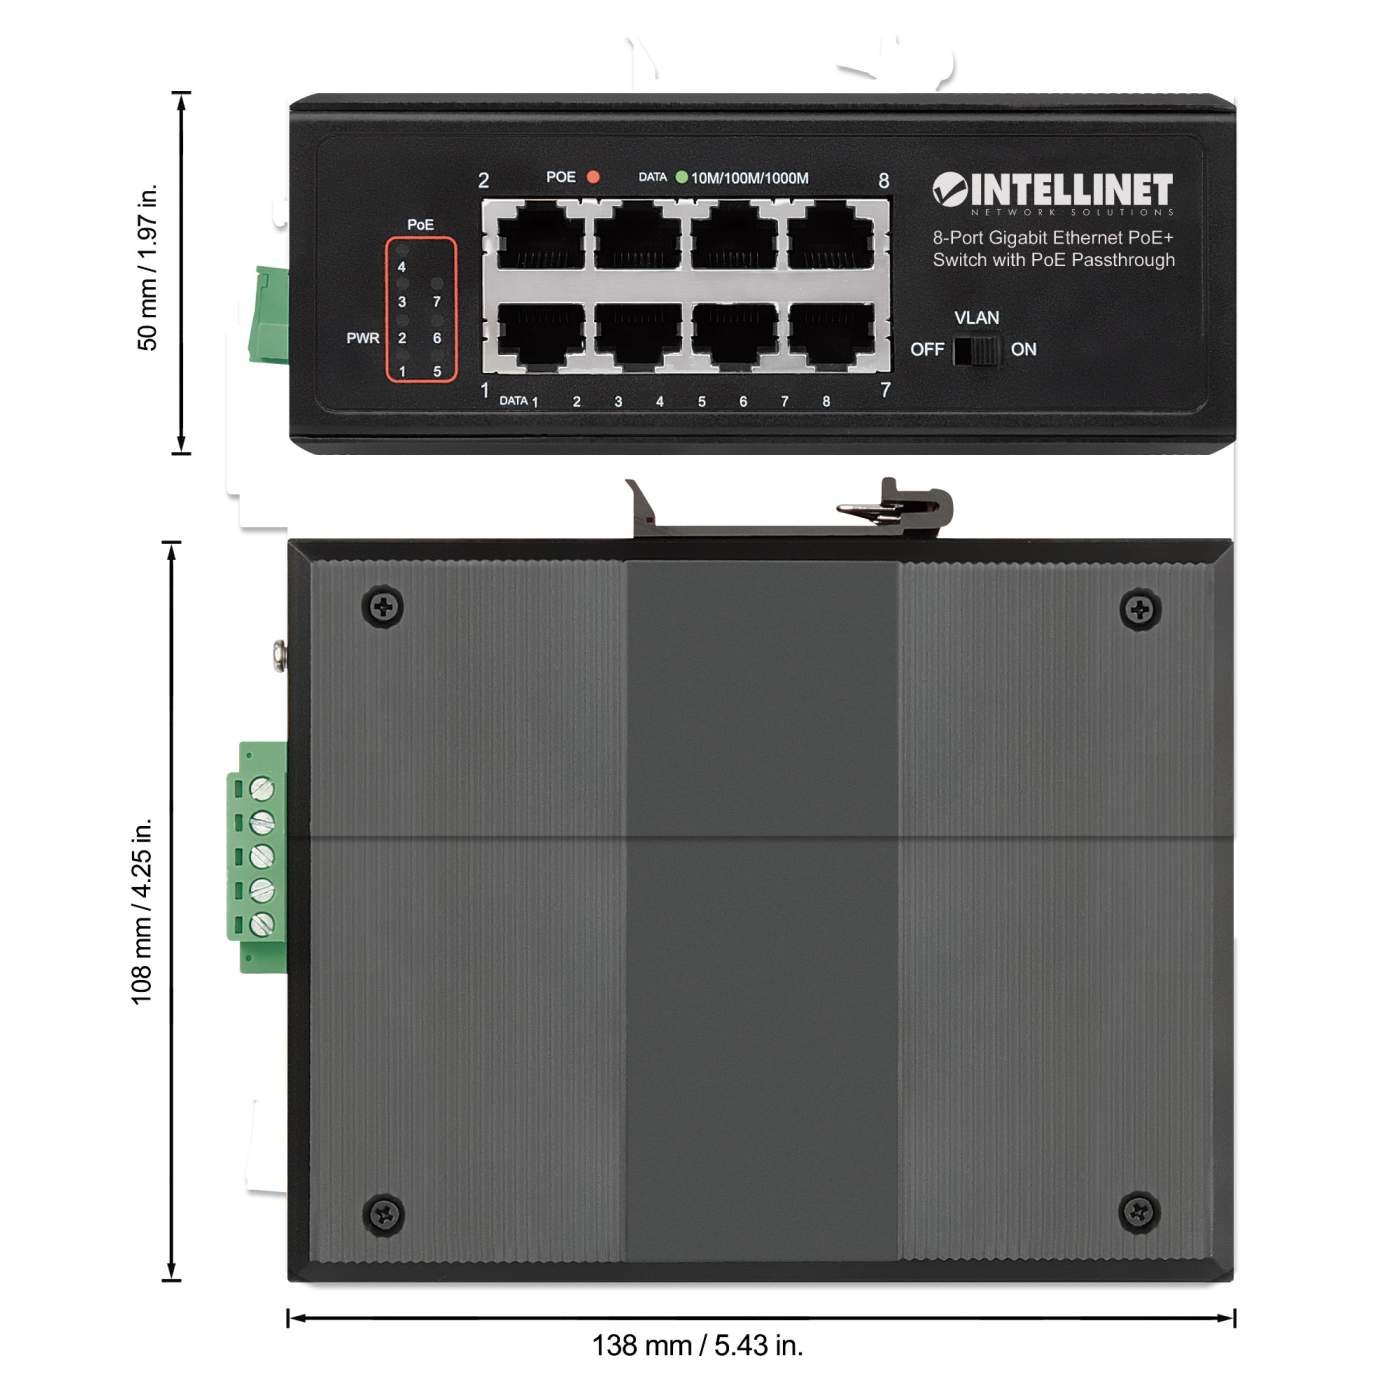 Industrial PoE-Powered 8-Port Gigabit Switch with PoE Passthrough